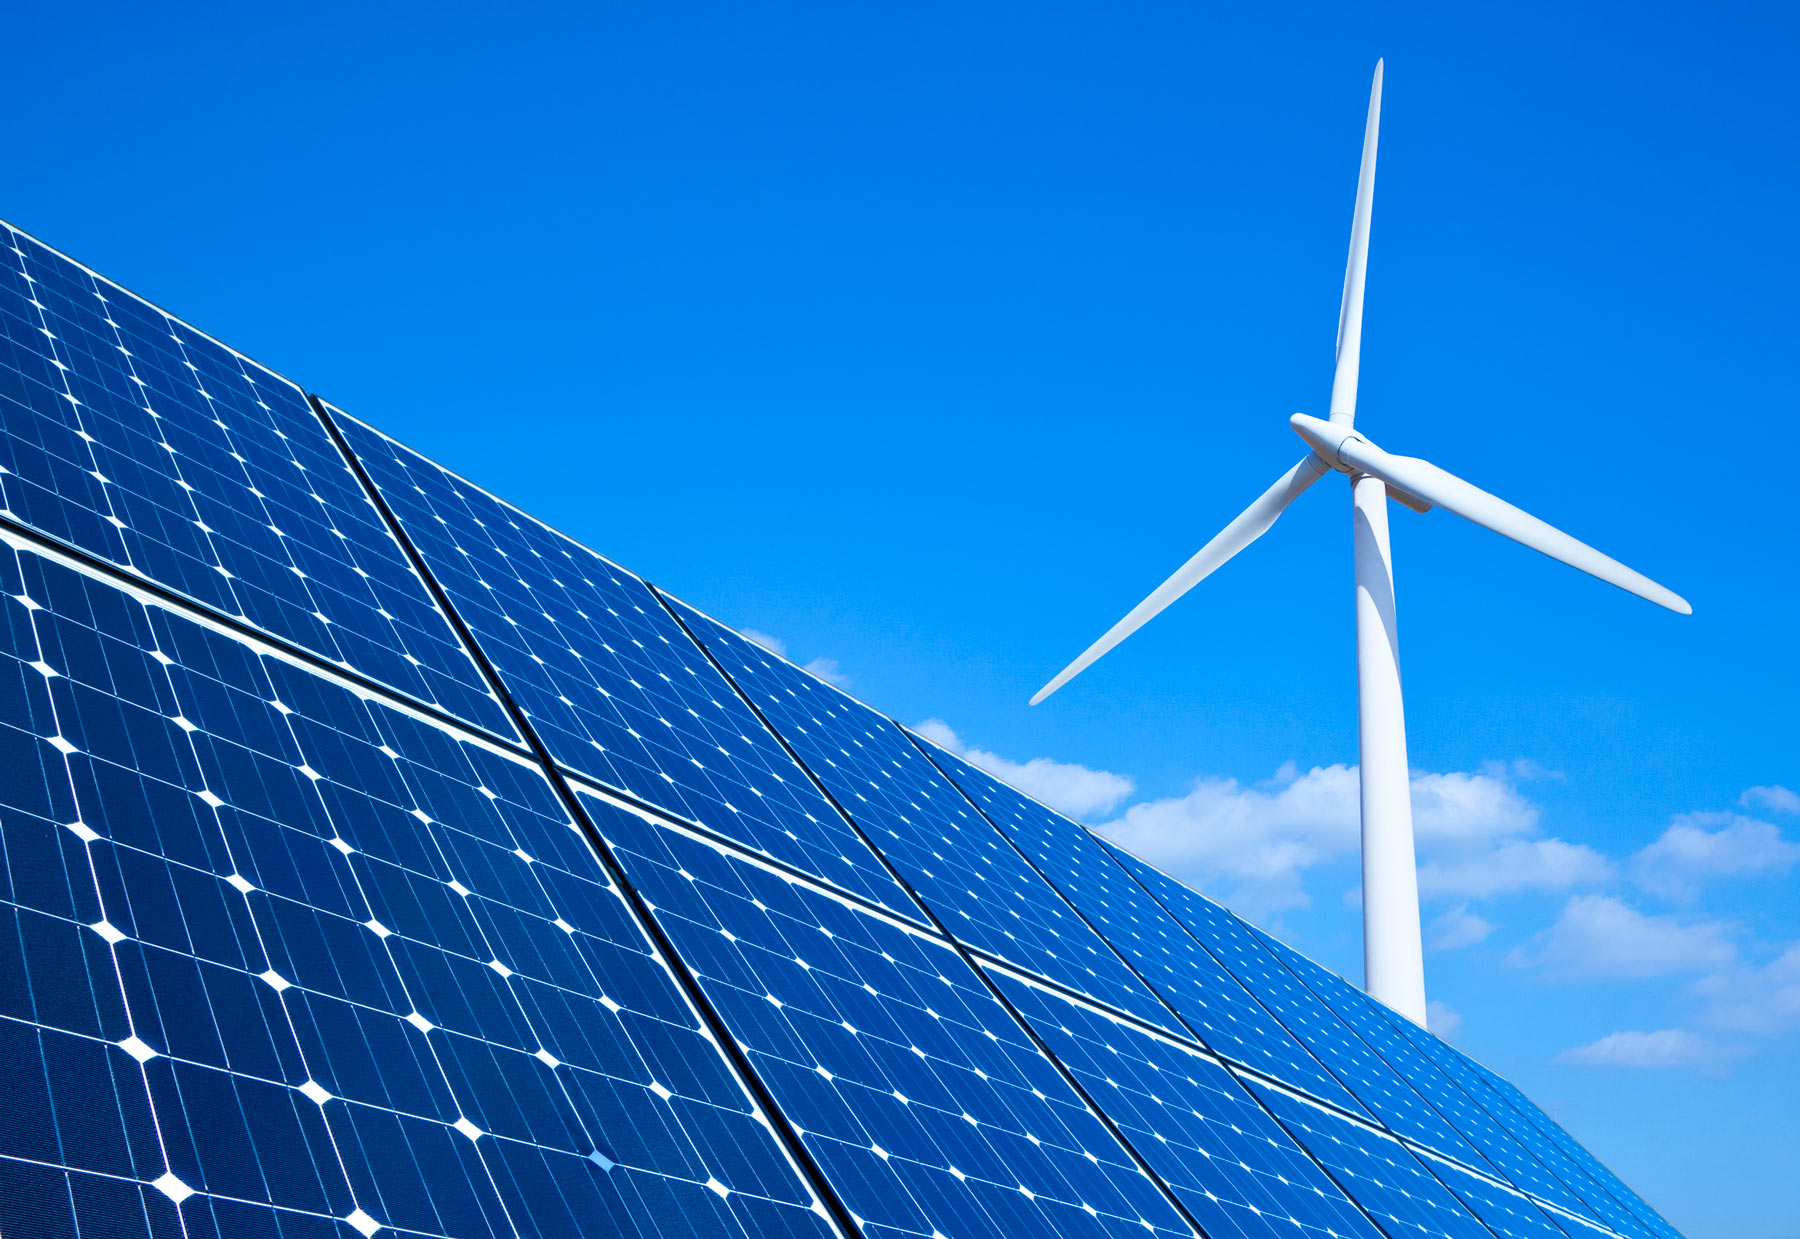 Renewable energy deployment surge puts global power system on